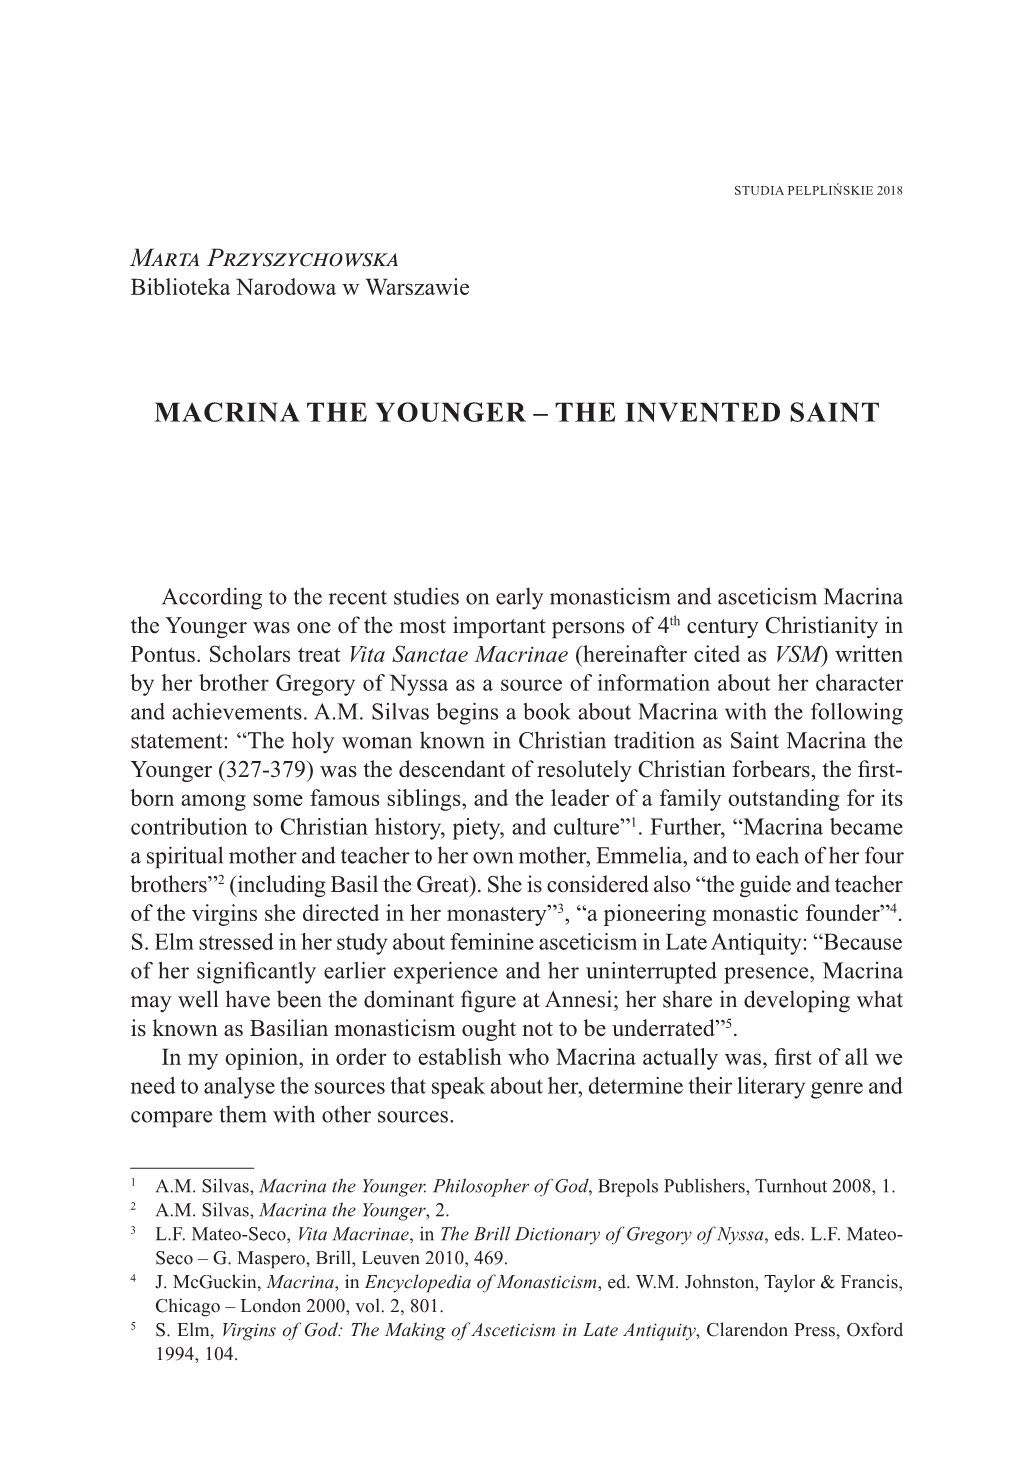 Macrina the Younger – the Invented Saint